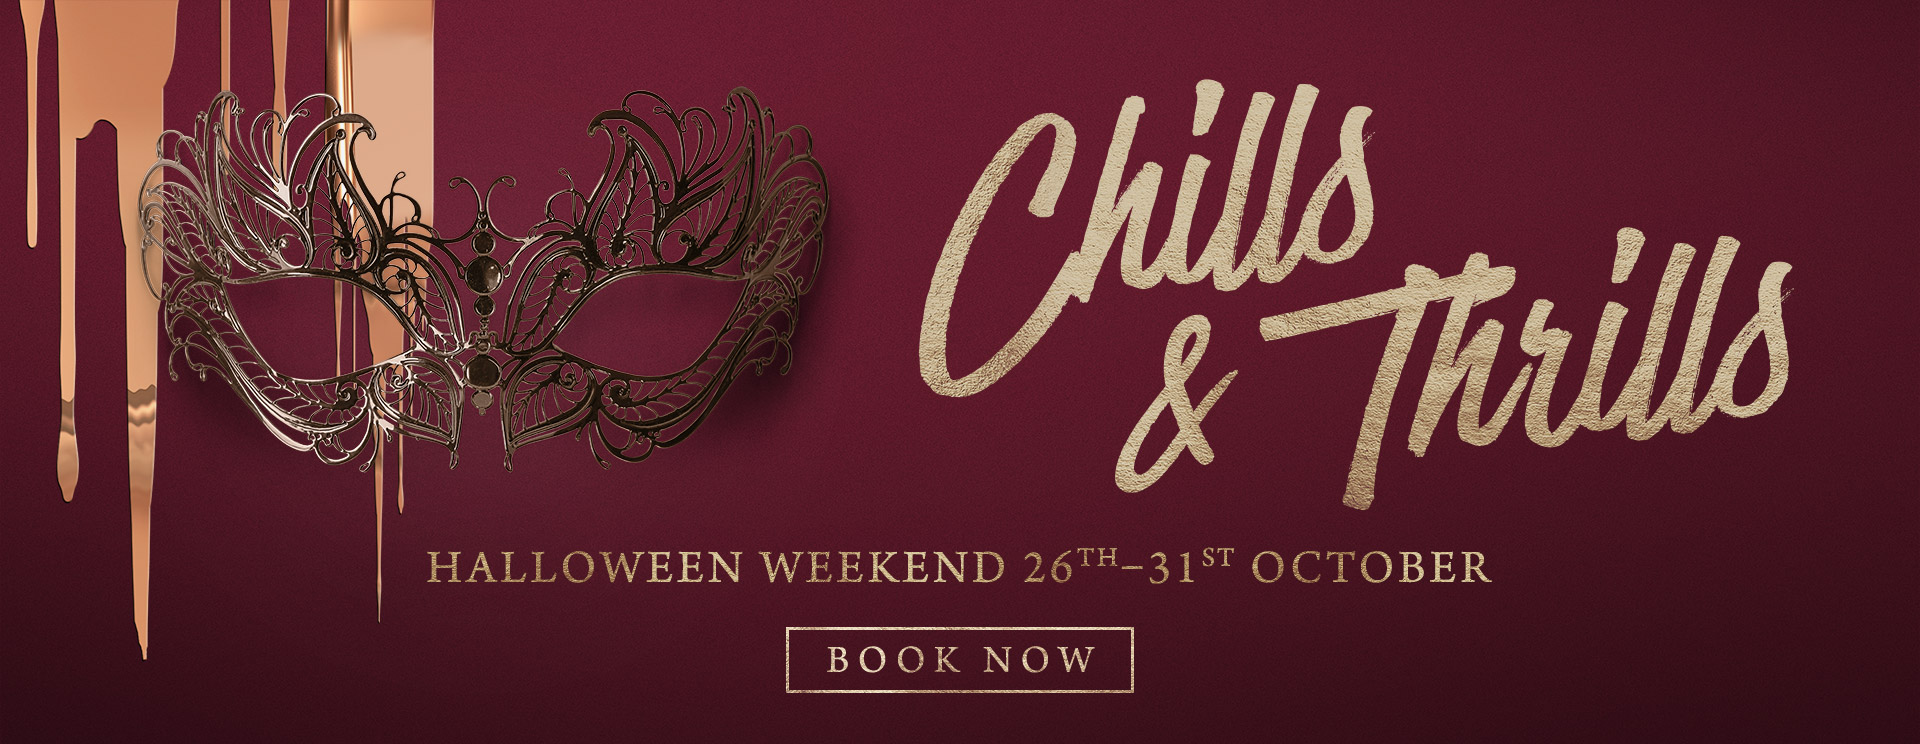 Chills & Thrills this Halloween at The Willett Arms